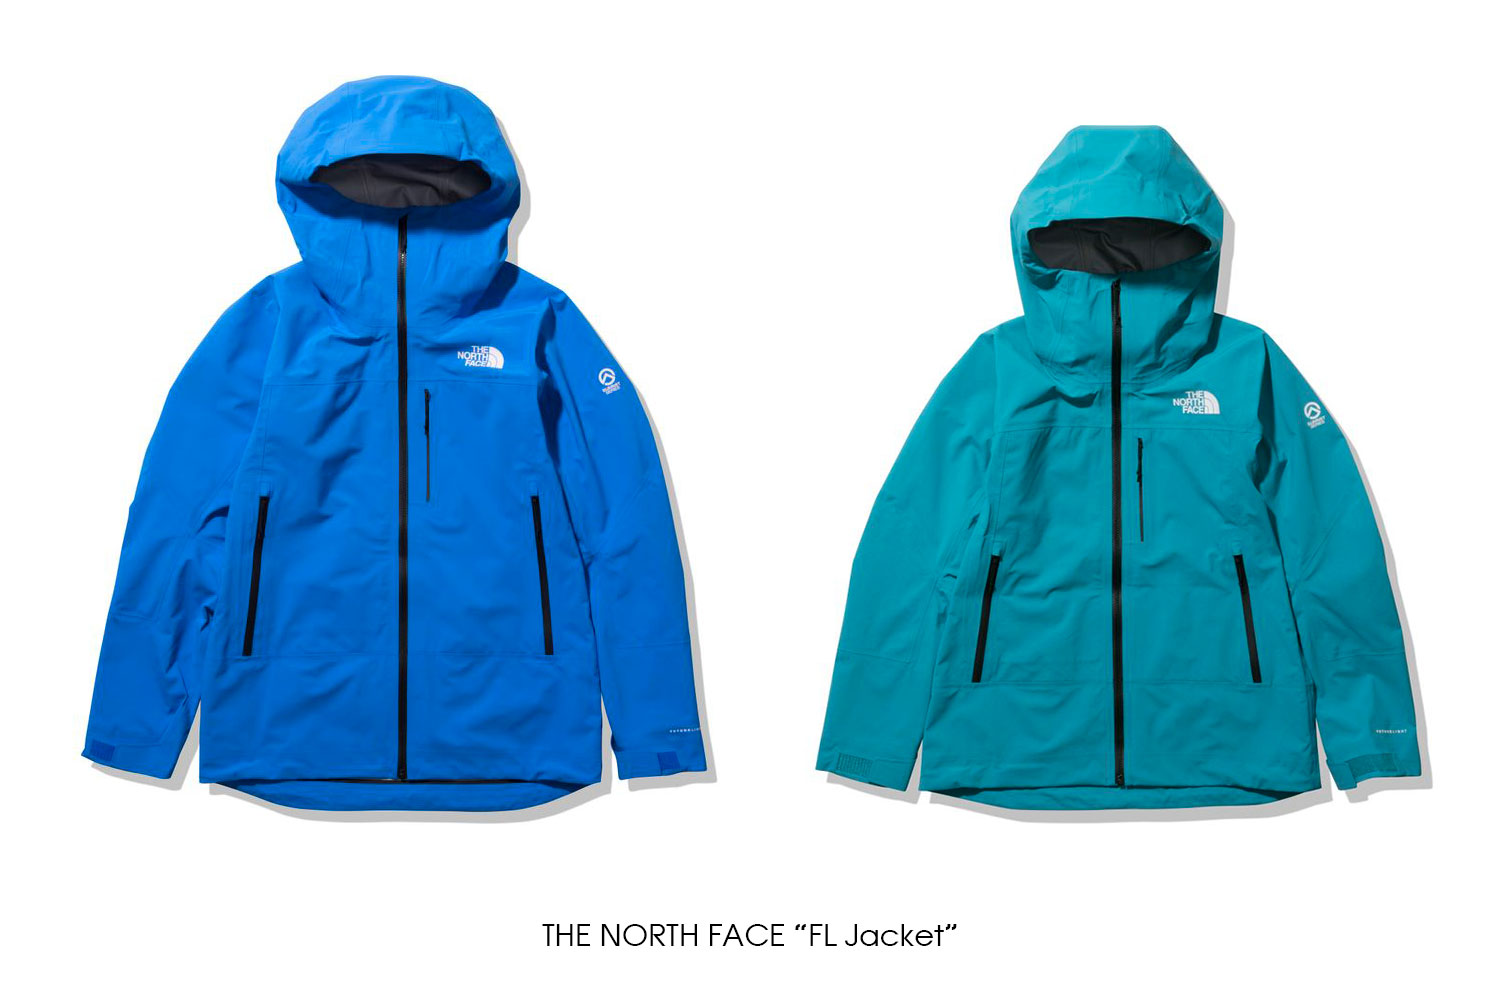 THE NORTH FACE "FL Jacket"